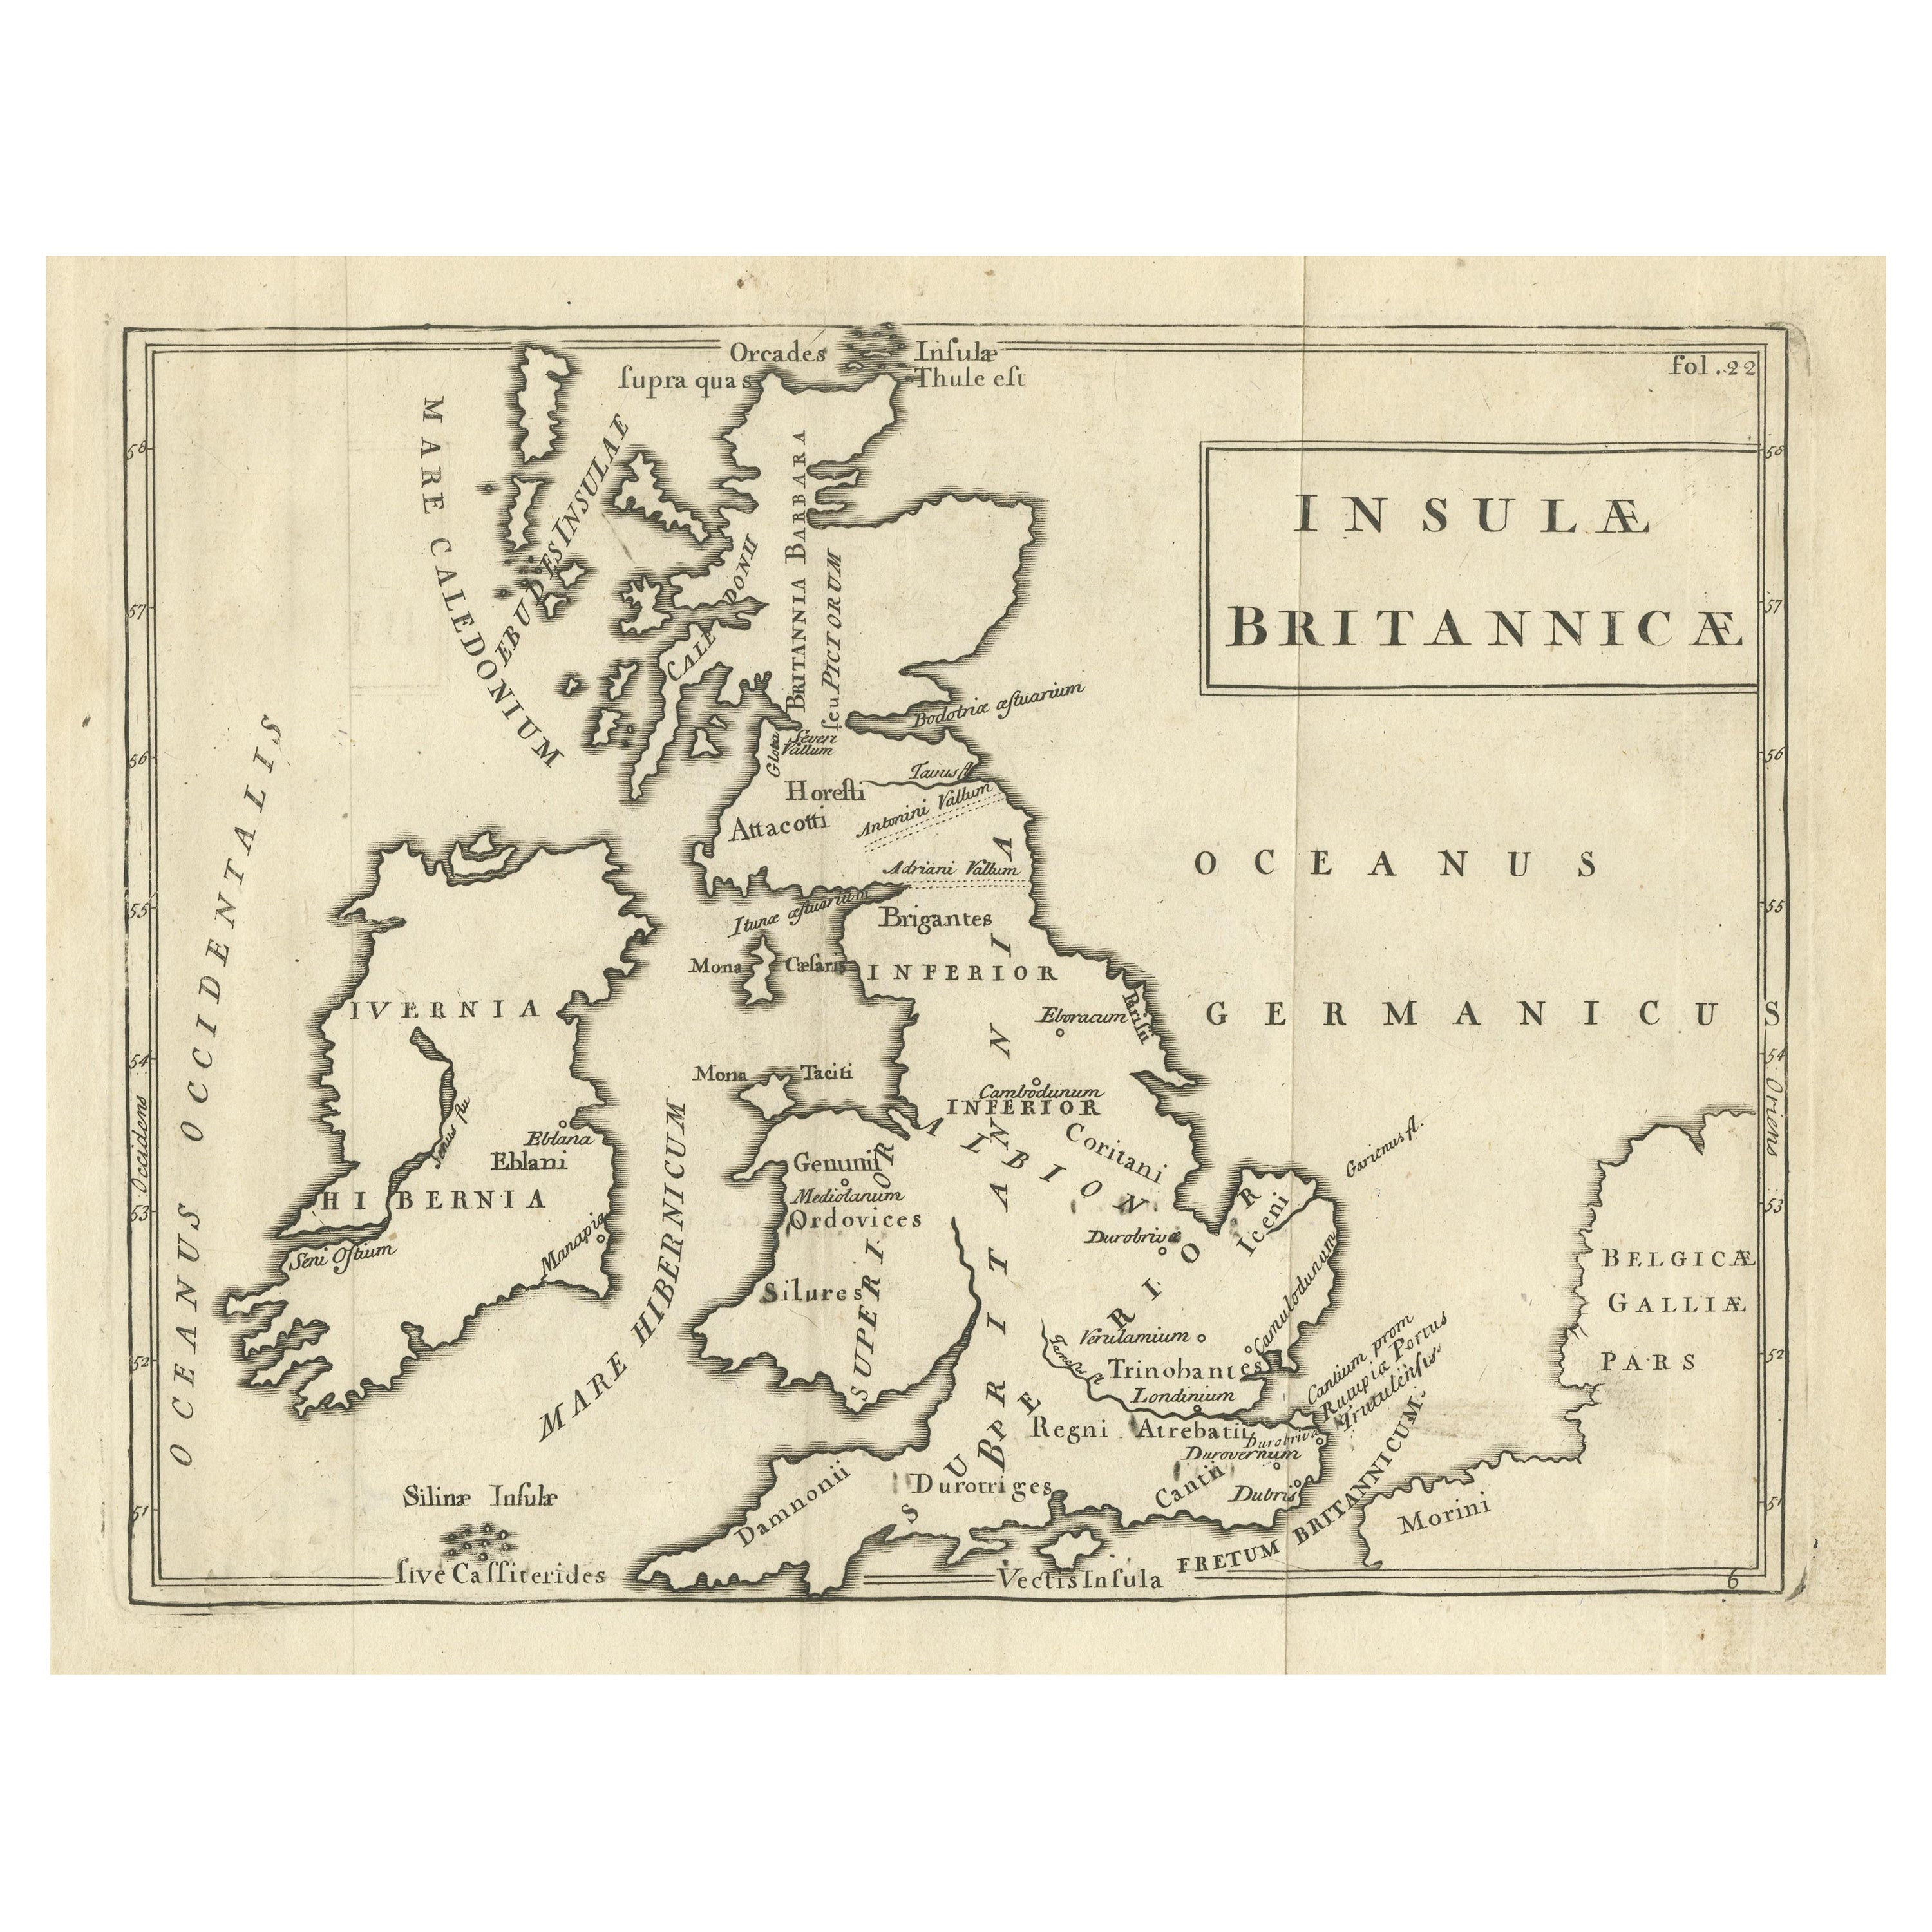 Antique Map of the British Isles with Walls, Settlements and Other Features For Sale